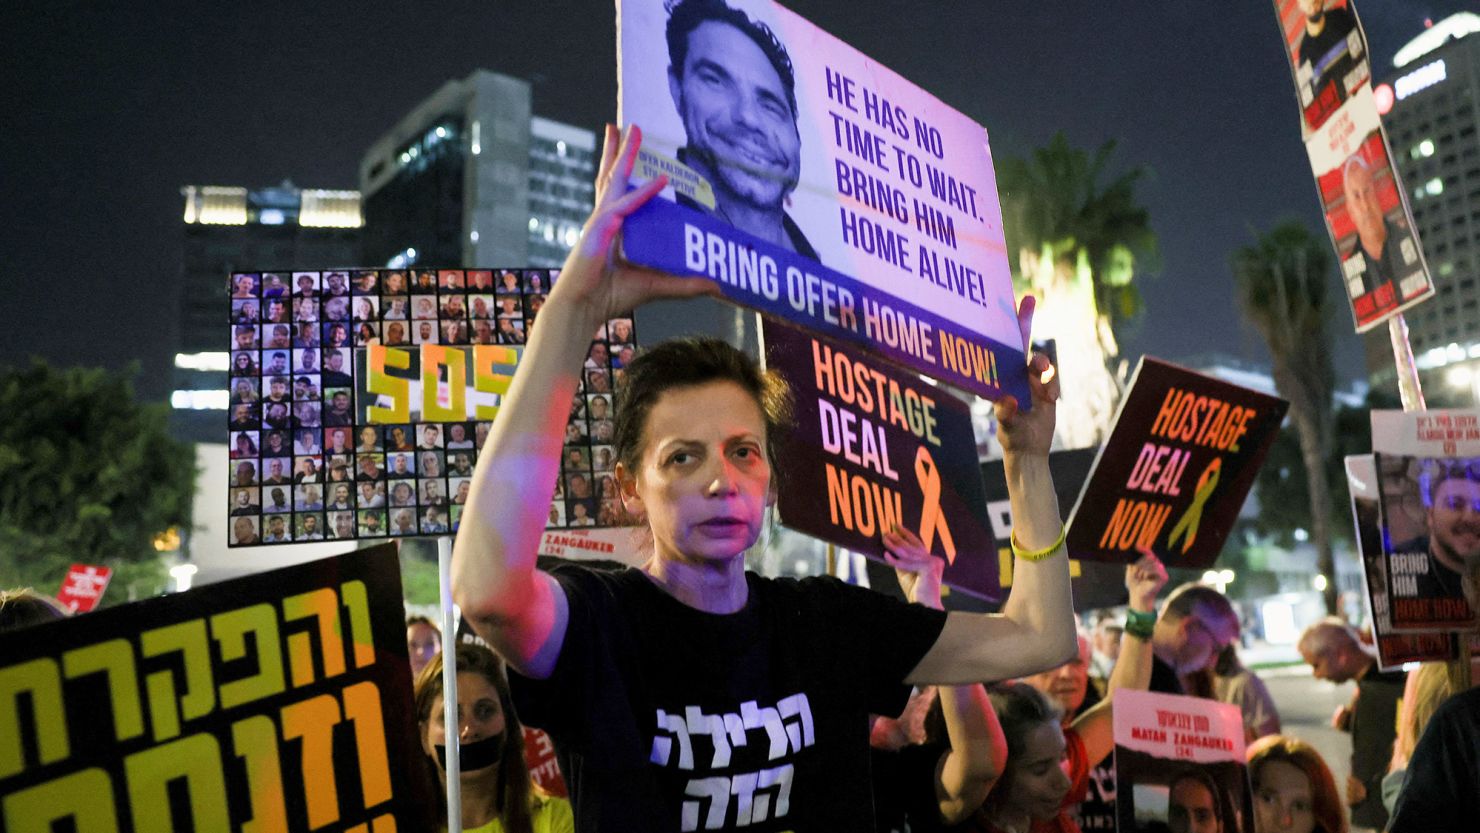 Protesters hold posters calling for the immediate release of Israeli hostages held in Gaza, in Tel Aviv, Israel, on Thursday.